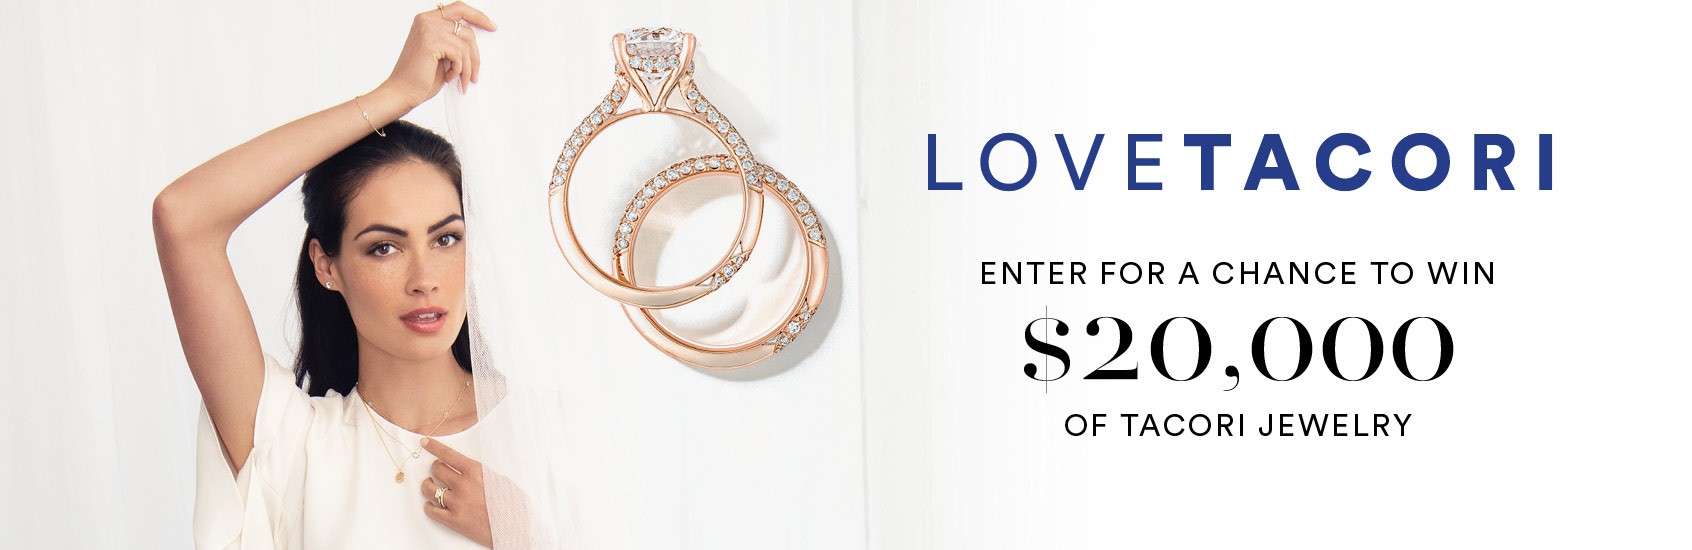 How to Win $20,000 in Tacori Jewelry (Yes, You Read That Right!)